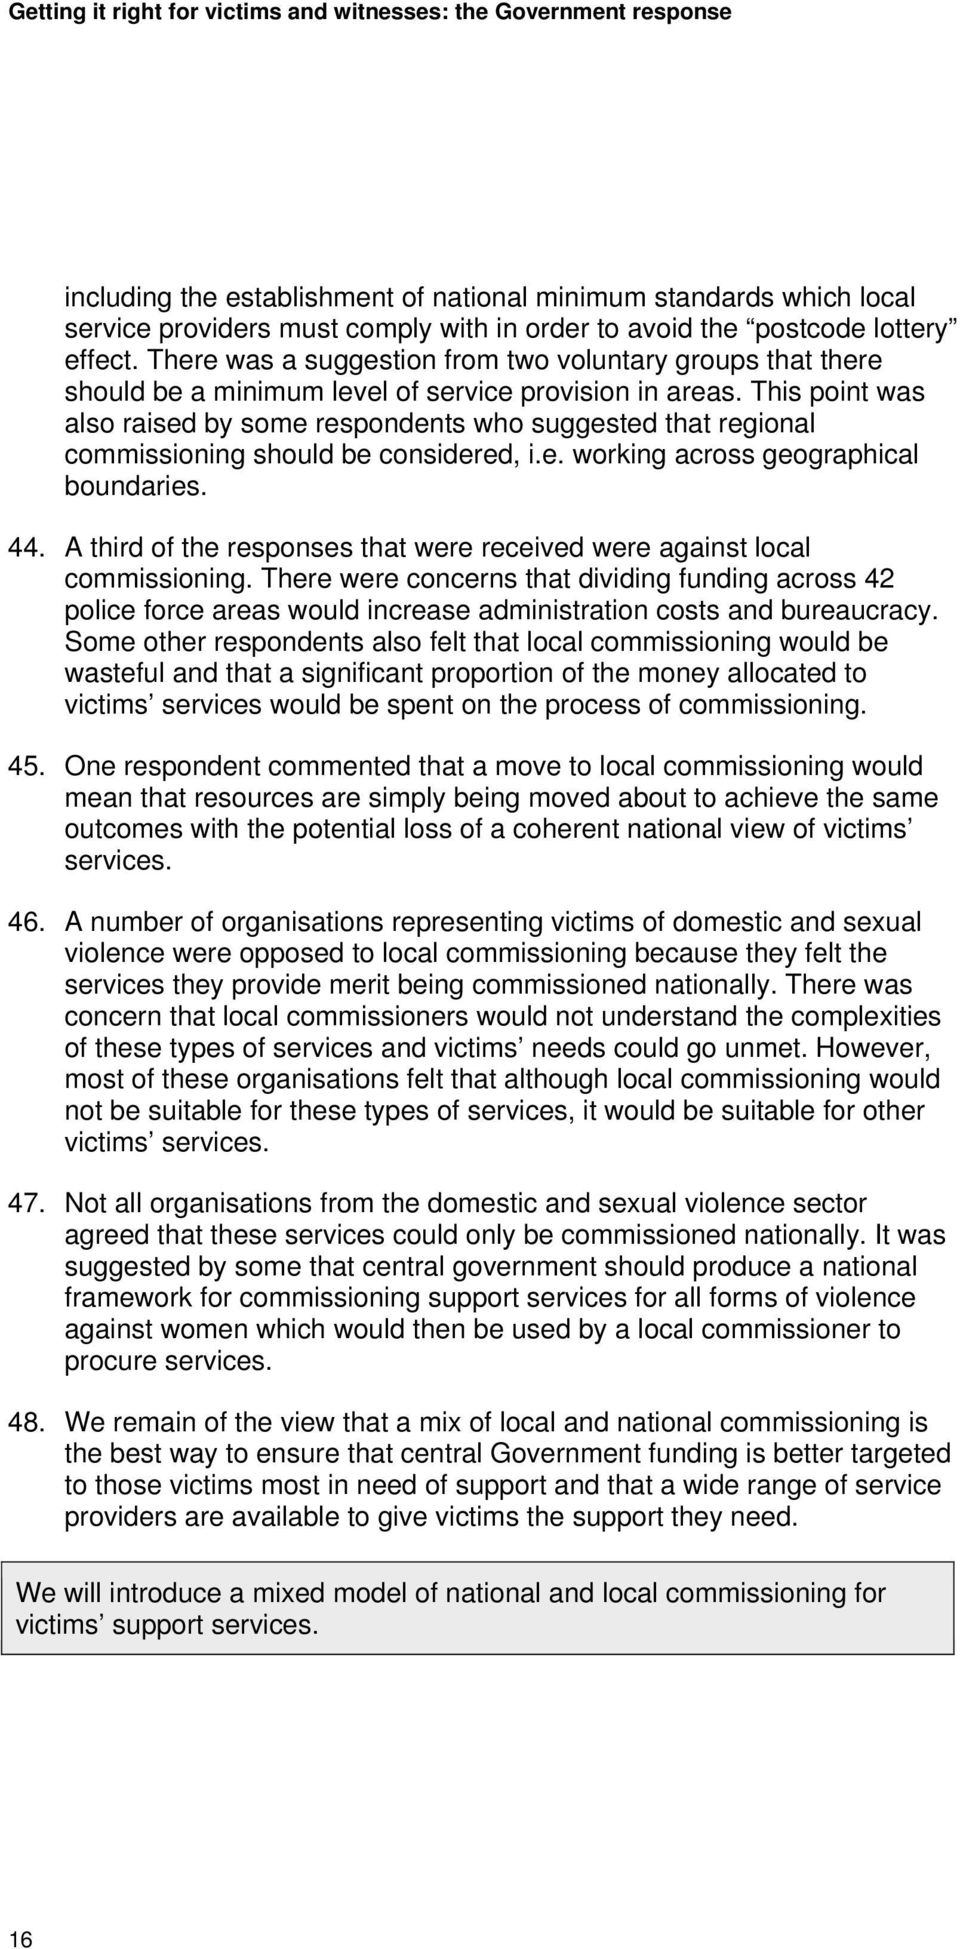 This point was also raised by some respondents who suggested that regional commissioning should be considered, i.e. working across geographical boundaries. 44.